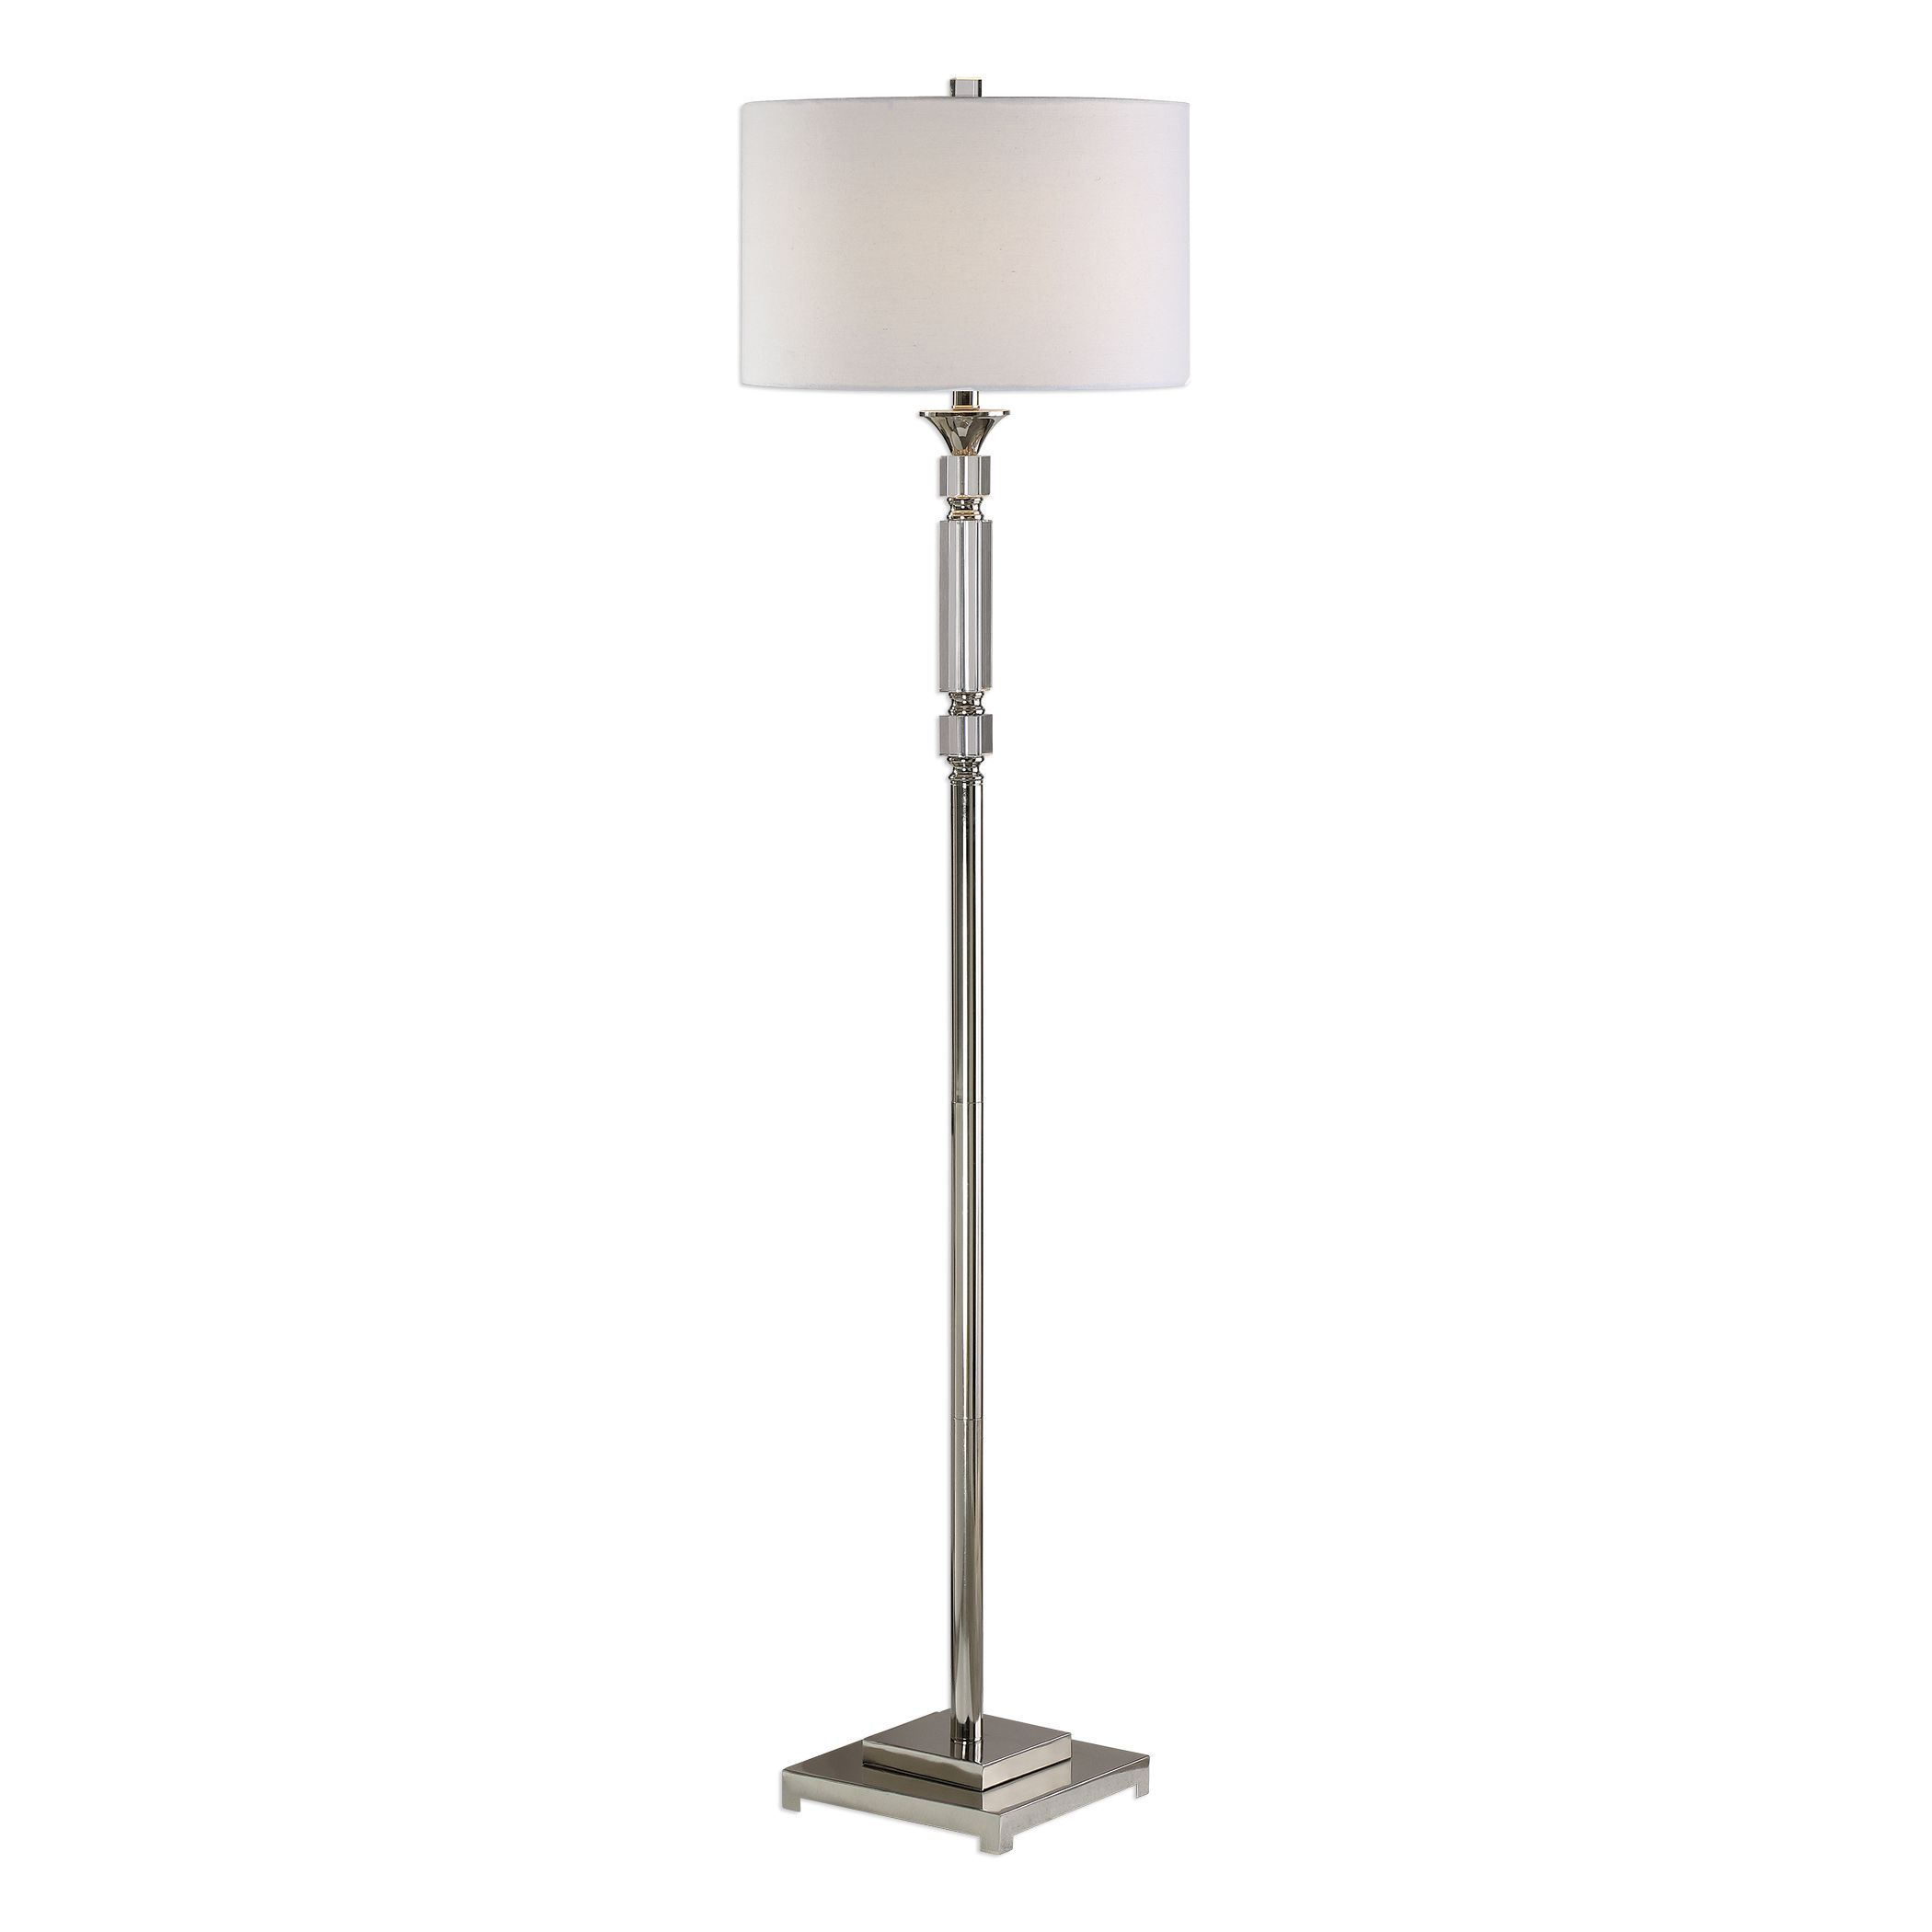 Volusia Transitional Polished Nickel And Crystal Floor Lamp within sizing 2100 X 2100